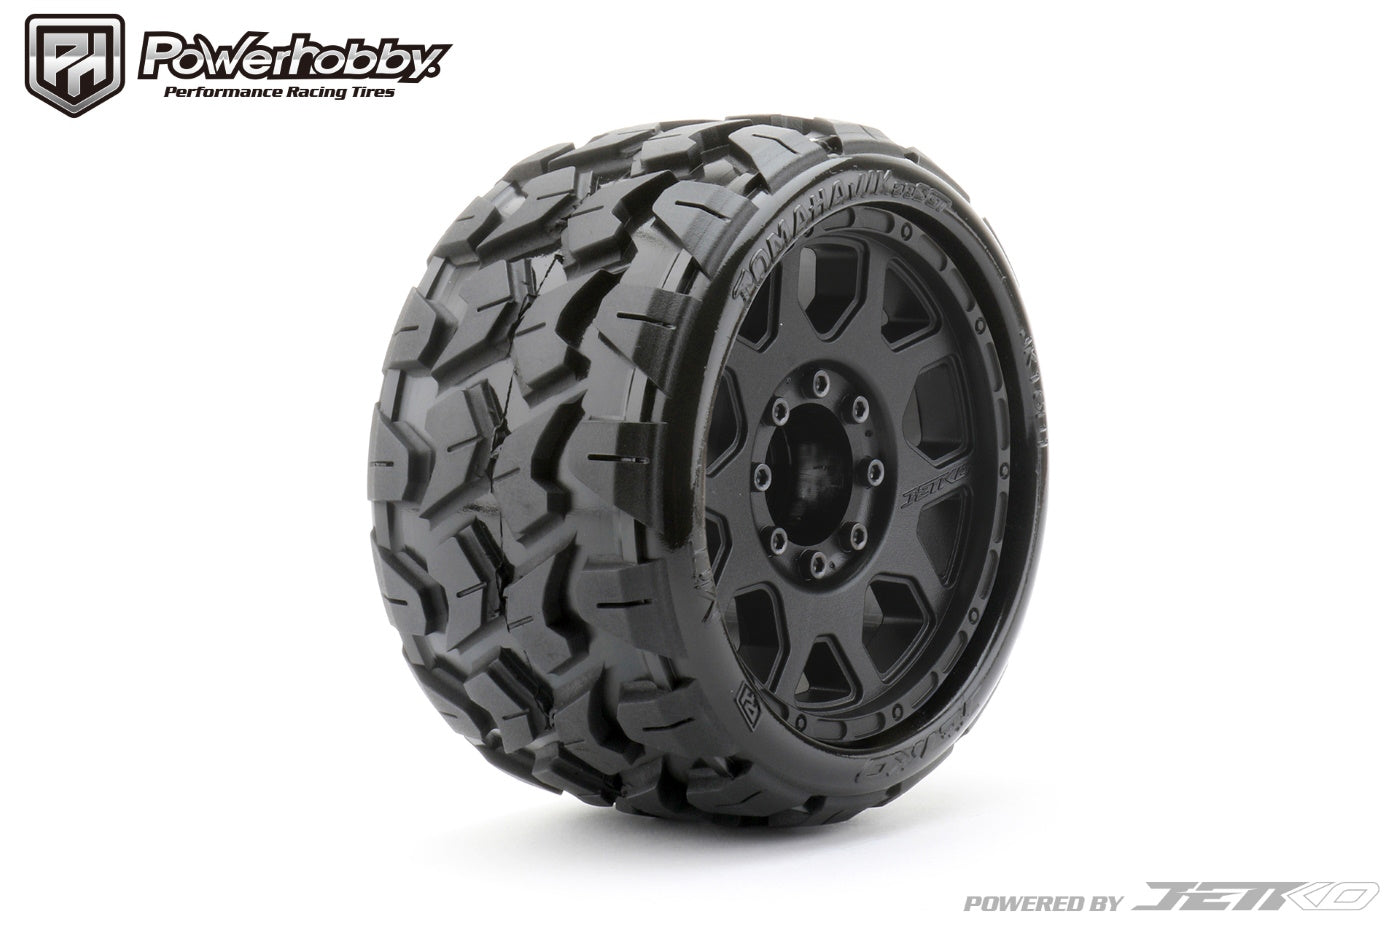 Powerhobby 1/8 SGT 3.8 Tomahawk Belted Mounted Tires (2) 17MM Low Profile - PowerHobby